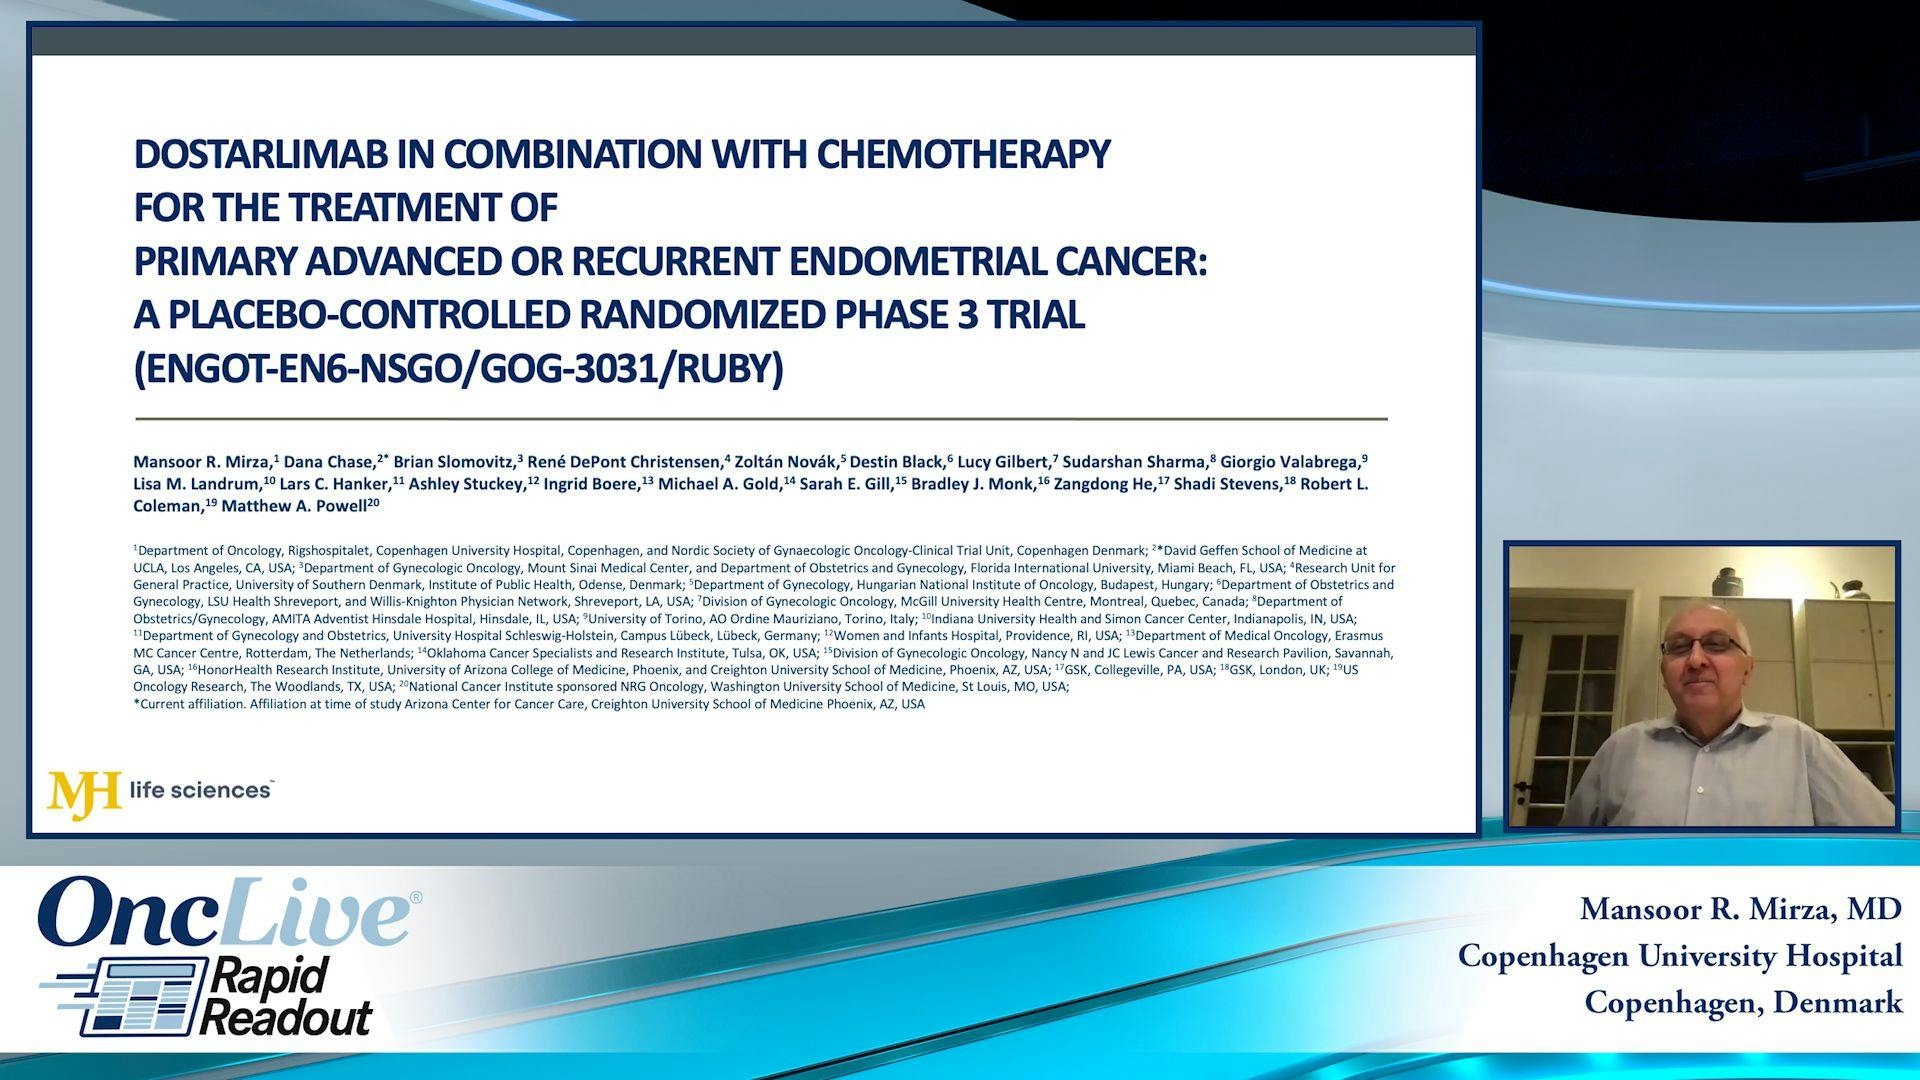 Dostarlimab in Combination with Chemotherapy for the Treatment of Primary Advanced or Recurrent Endometrial Cancer: A Placebo-Controlled Randomized Phase 3 Trial (ENGOT-EN6-NSGO/GOG-3031/RUBY)